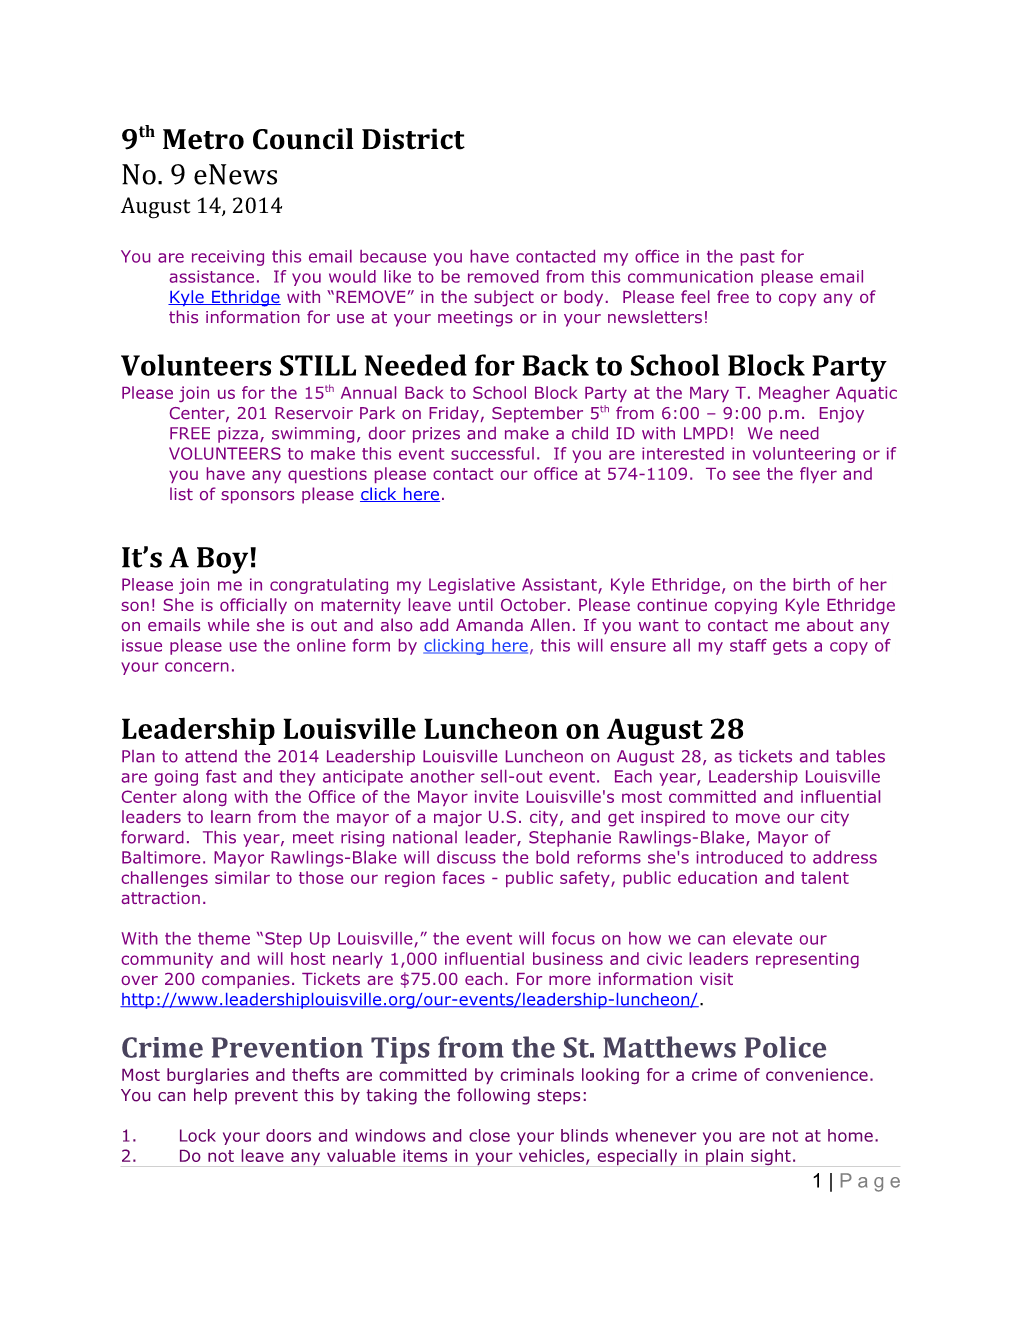 Volunteers STILL Needed for Back to School Block Party